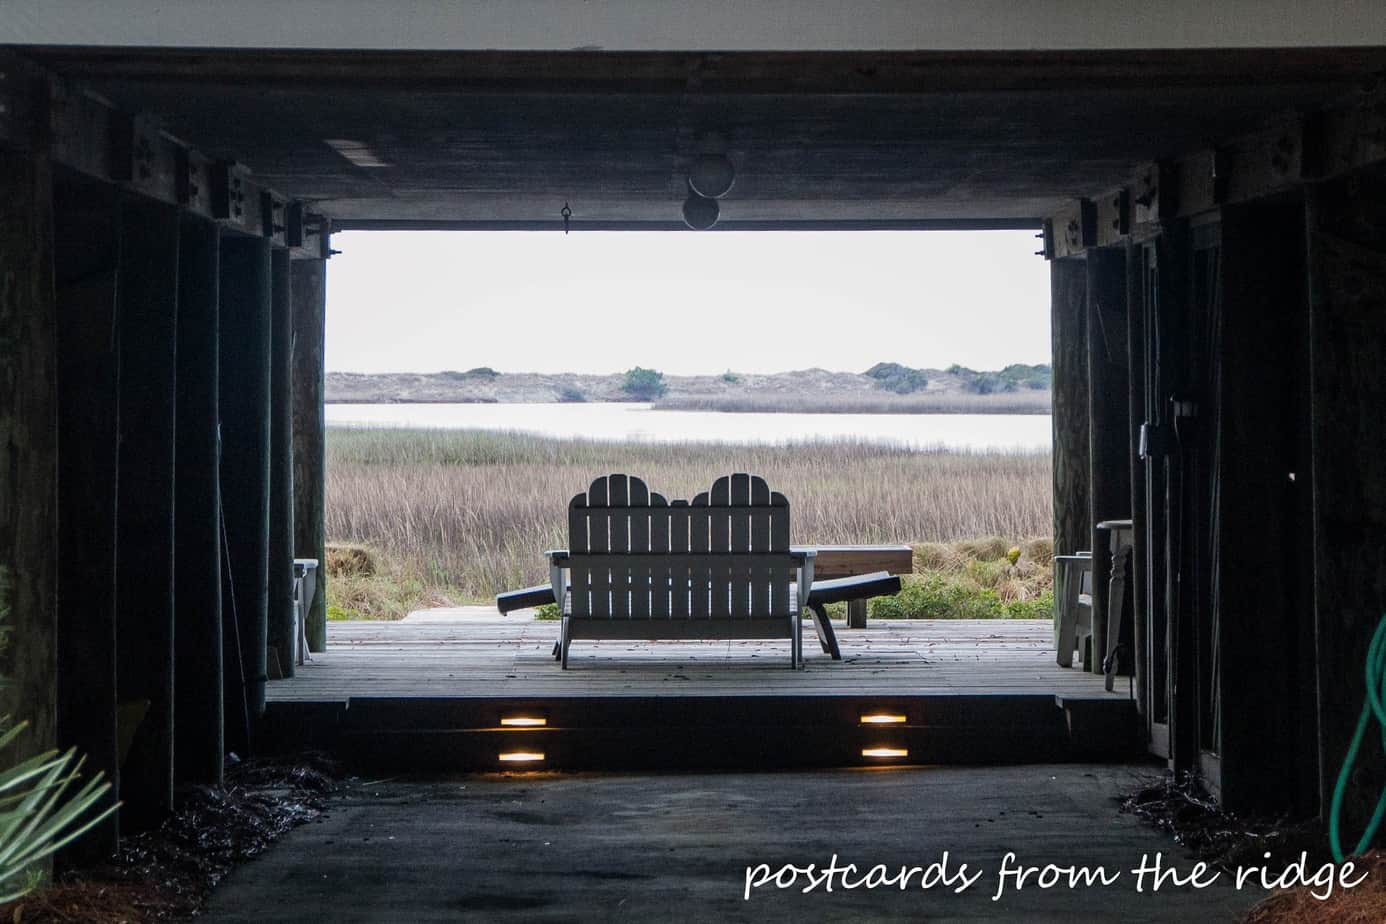 Lovely spot overlooking the marsh at Kiawah Island, SC. Postcards from the Ridge.